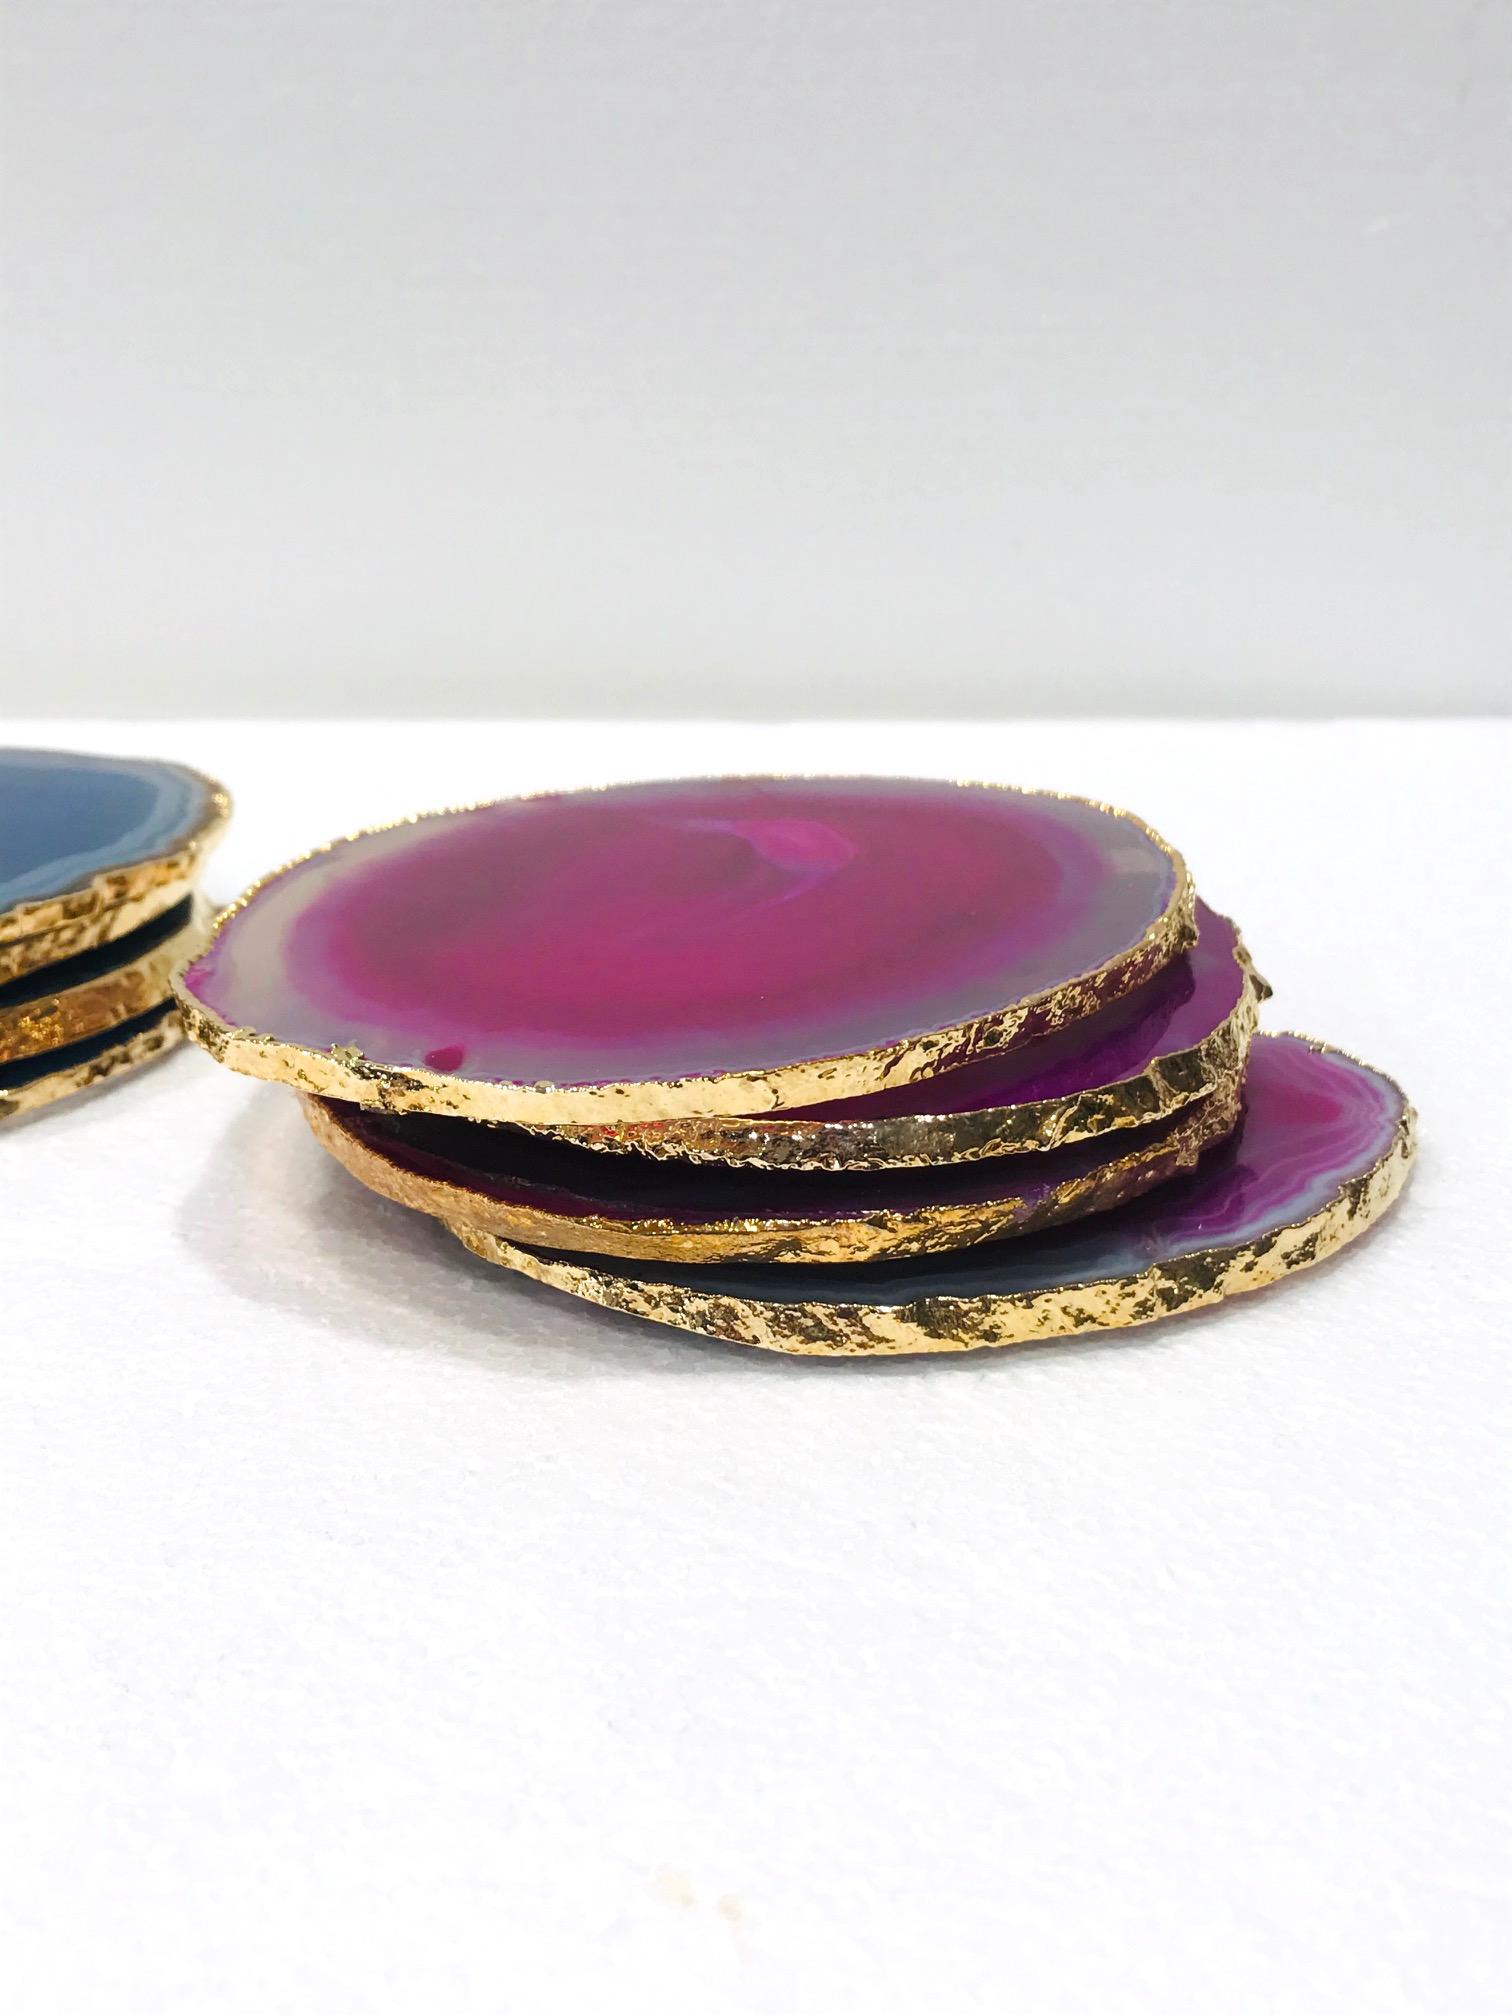 Semi-Precious Gemstone Coasters in Pink and Turquoise with 24k Gold Trim, Set /8 For Sale 1